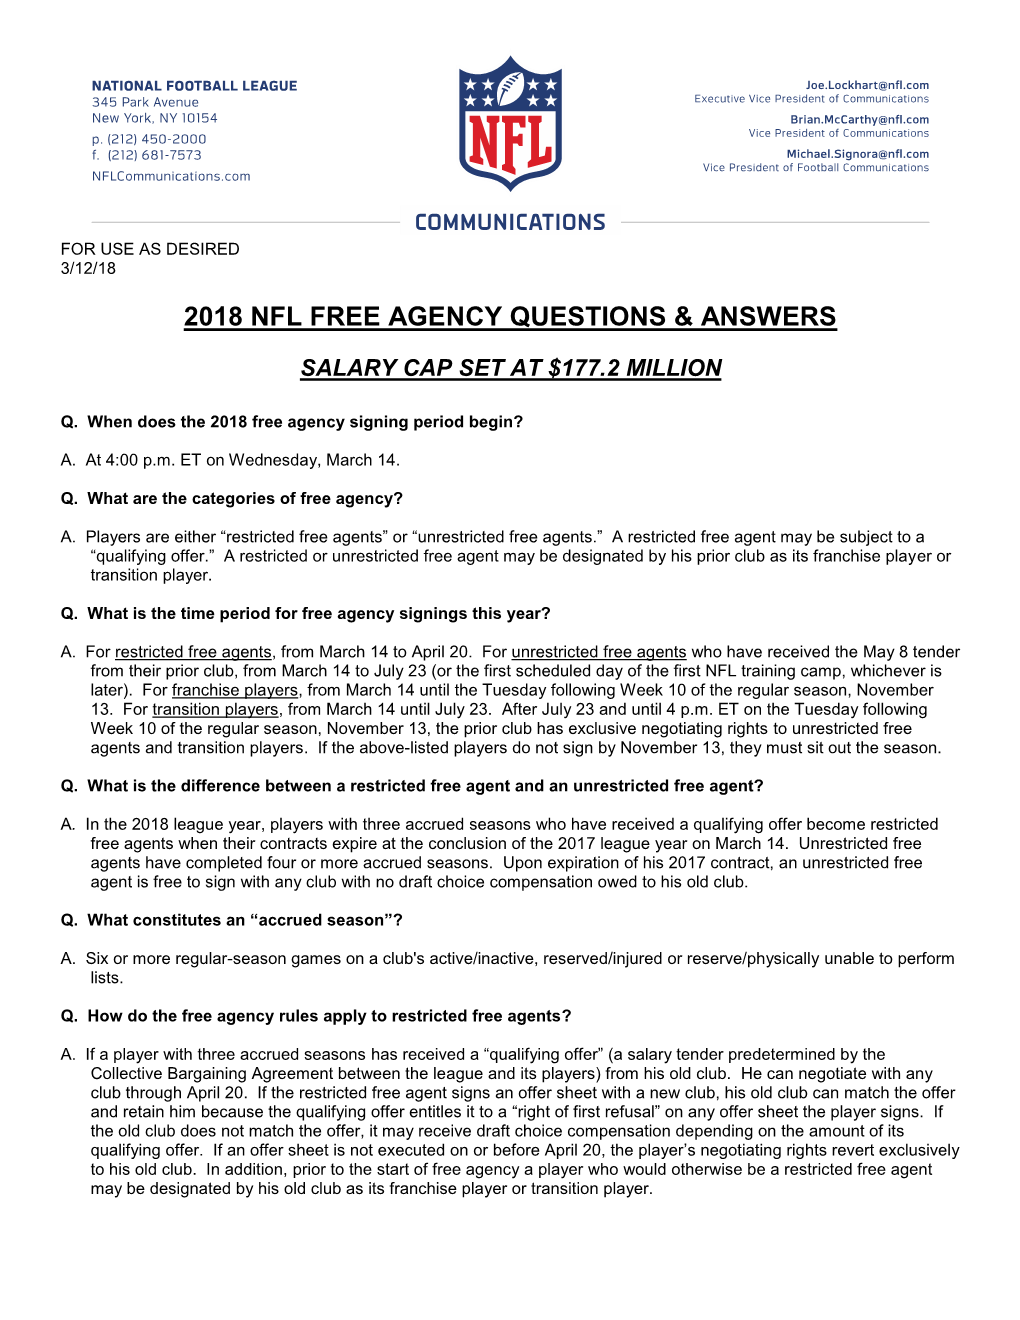 2018 Nfl Free Agency Questions & Answers